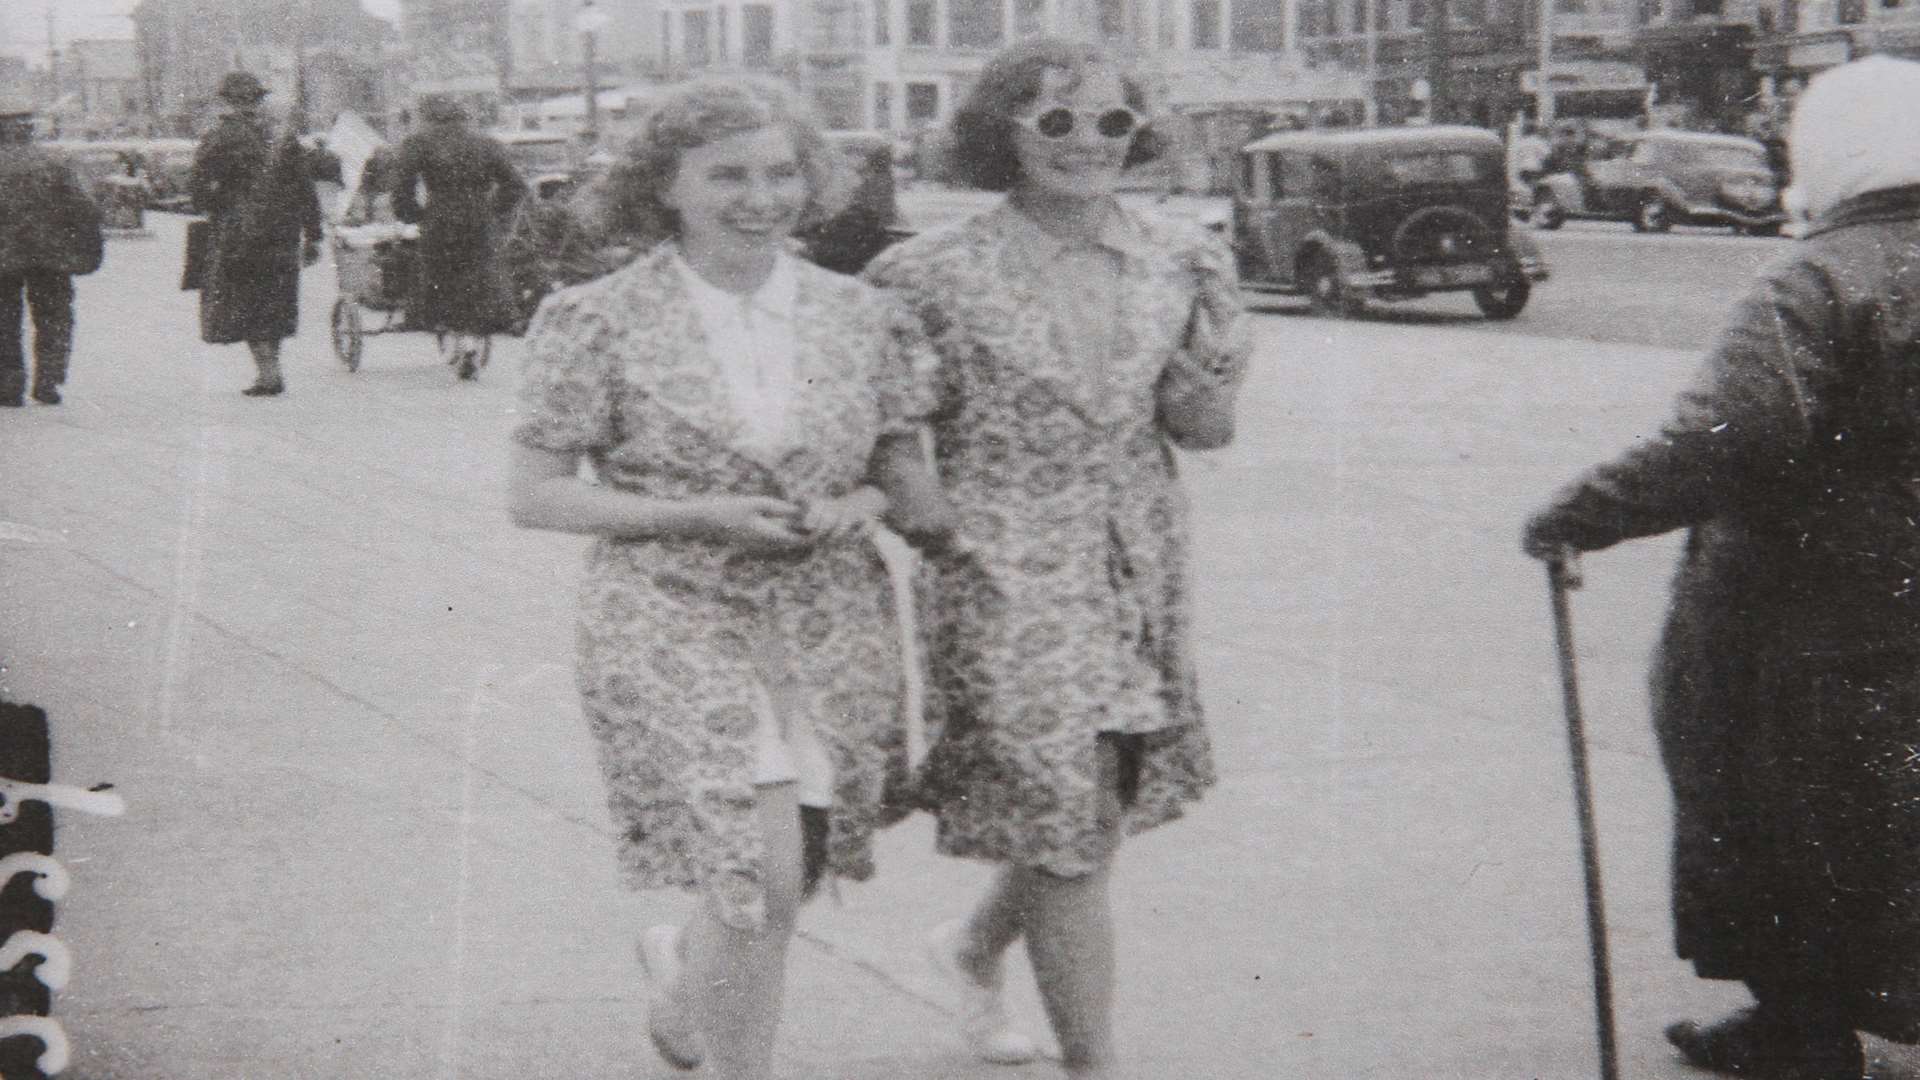 From left to right, Peggy Rouse and Beryl Goodburn in a black and white photo from their younger days.